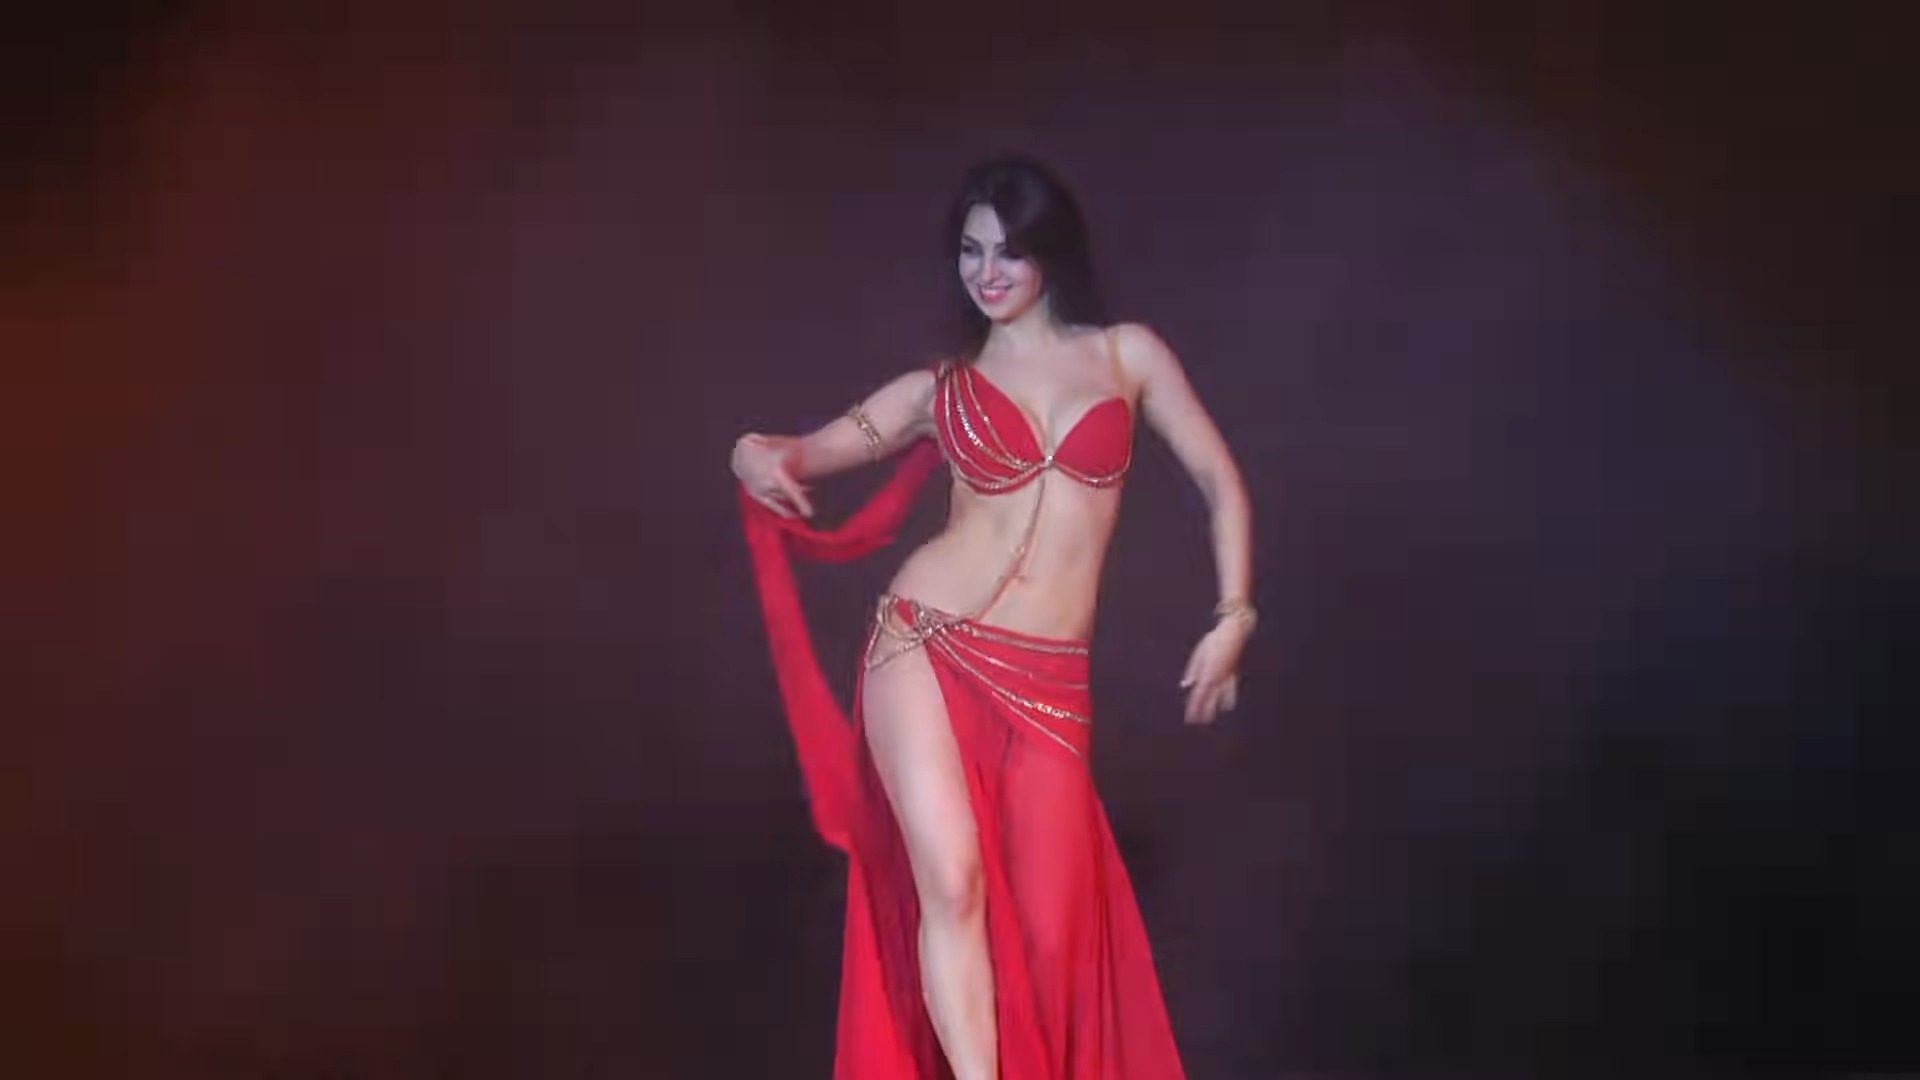 bruce harrelson recommends erotic belly dance pic